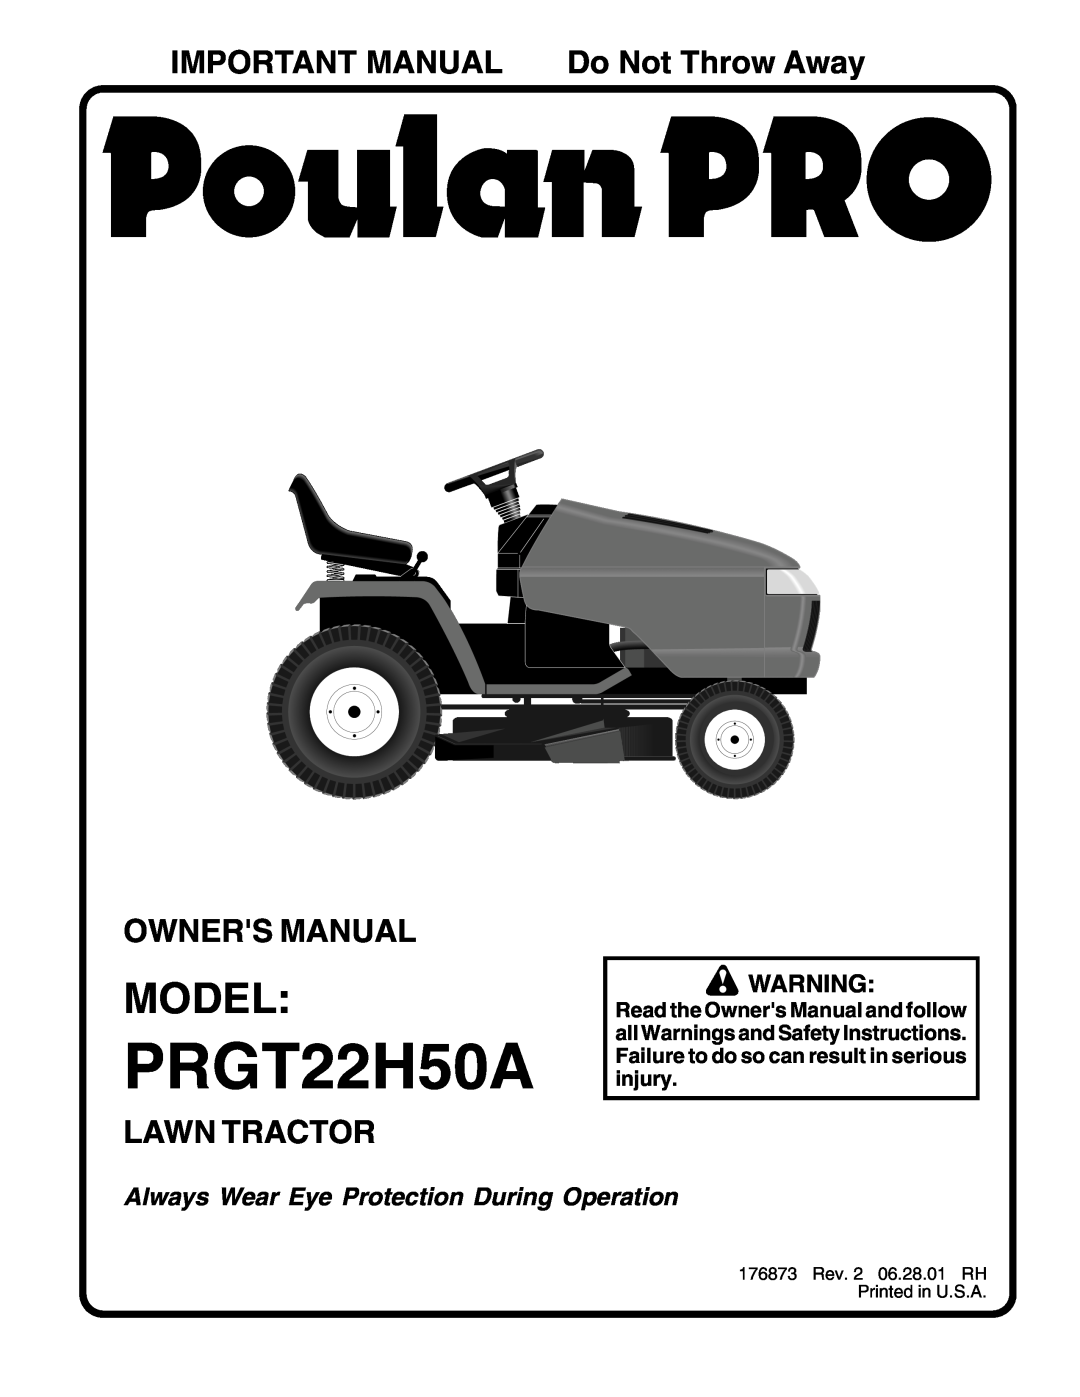 Poulan 176873 owner manual Model, IMPORTANT MANUAL Do Not Throw Away, Owners Manual, Lawn Tractor, PRGT22H50A 